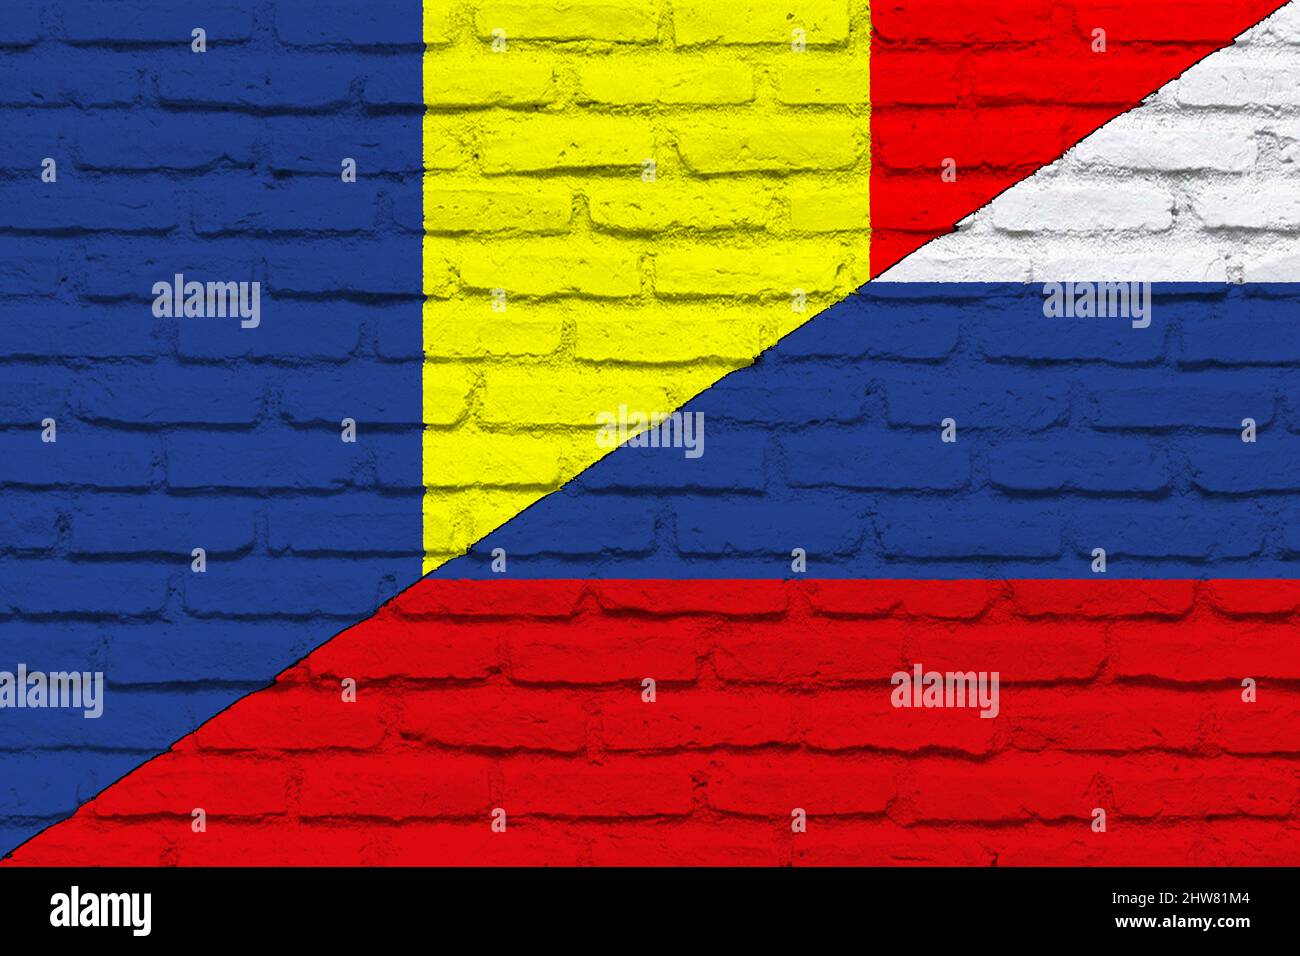 Conflict between Russia and Republic of Moldova war concept. Russian flag and Republic of Moldova flag background. Flag with brick wall texture. Stock Photo